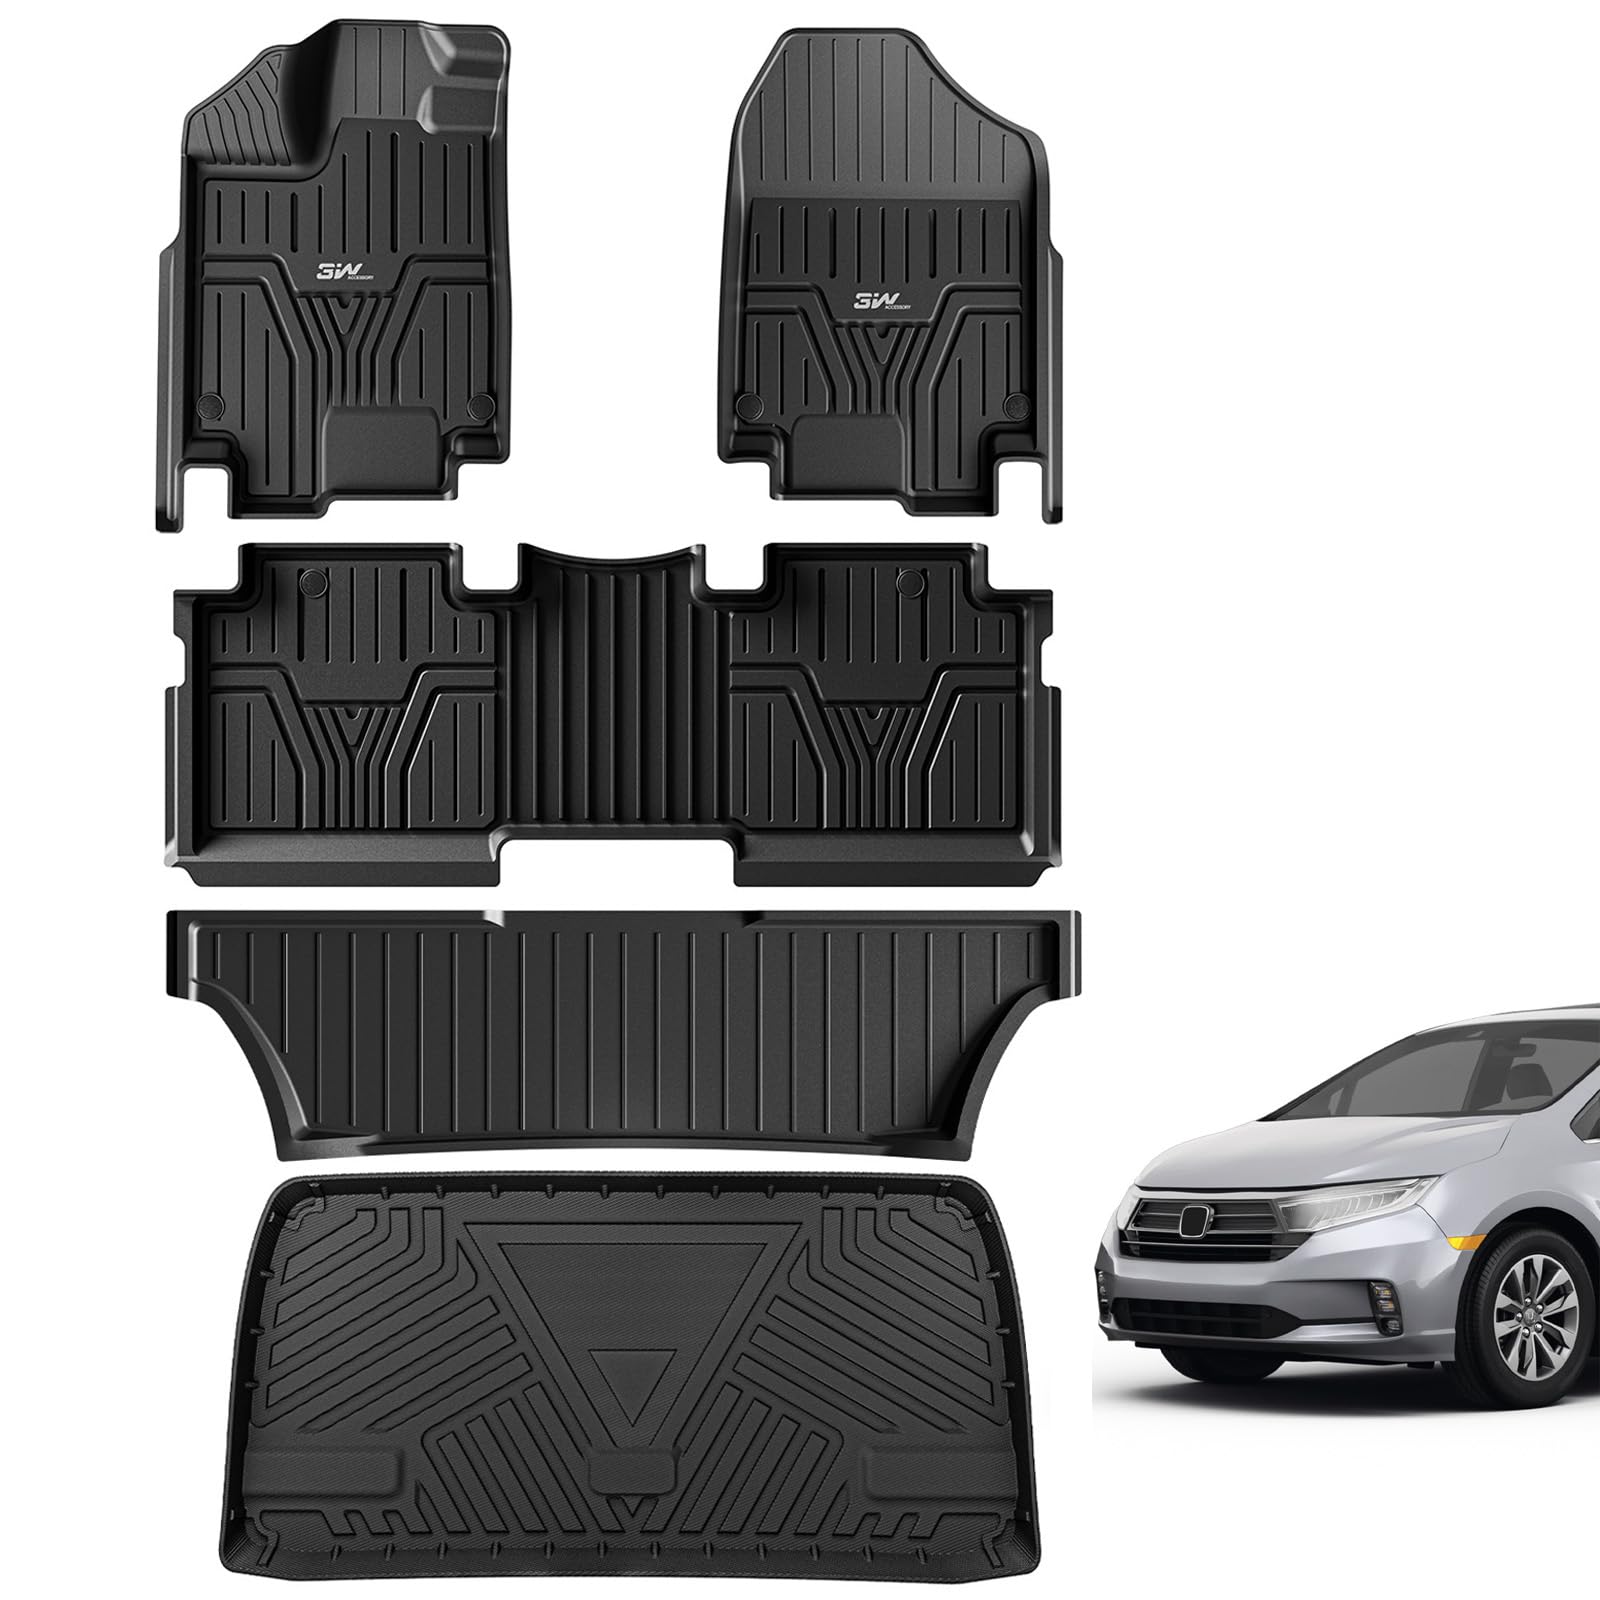 3W Honda Odyssey 2018-2024 Custom Floor Mats / Trunk Mat TPE Material & All-Weather Protection Vehicles & Parts 3Wliners 2018-2024 Odyssey 2018-2024 1st&2nd&3rd Row+Trunk Mat